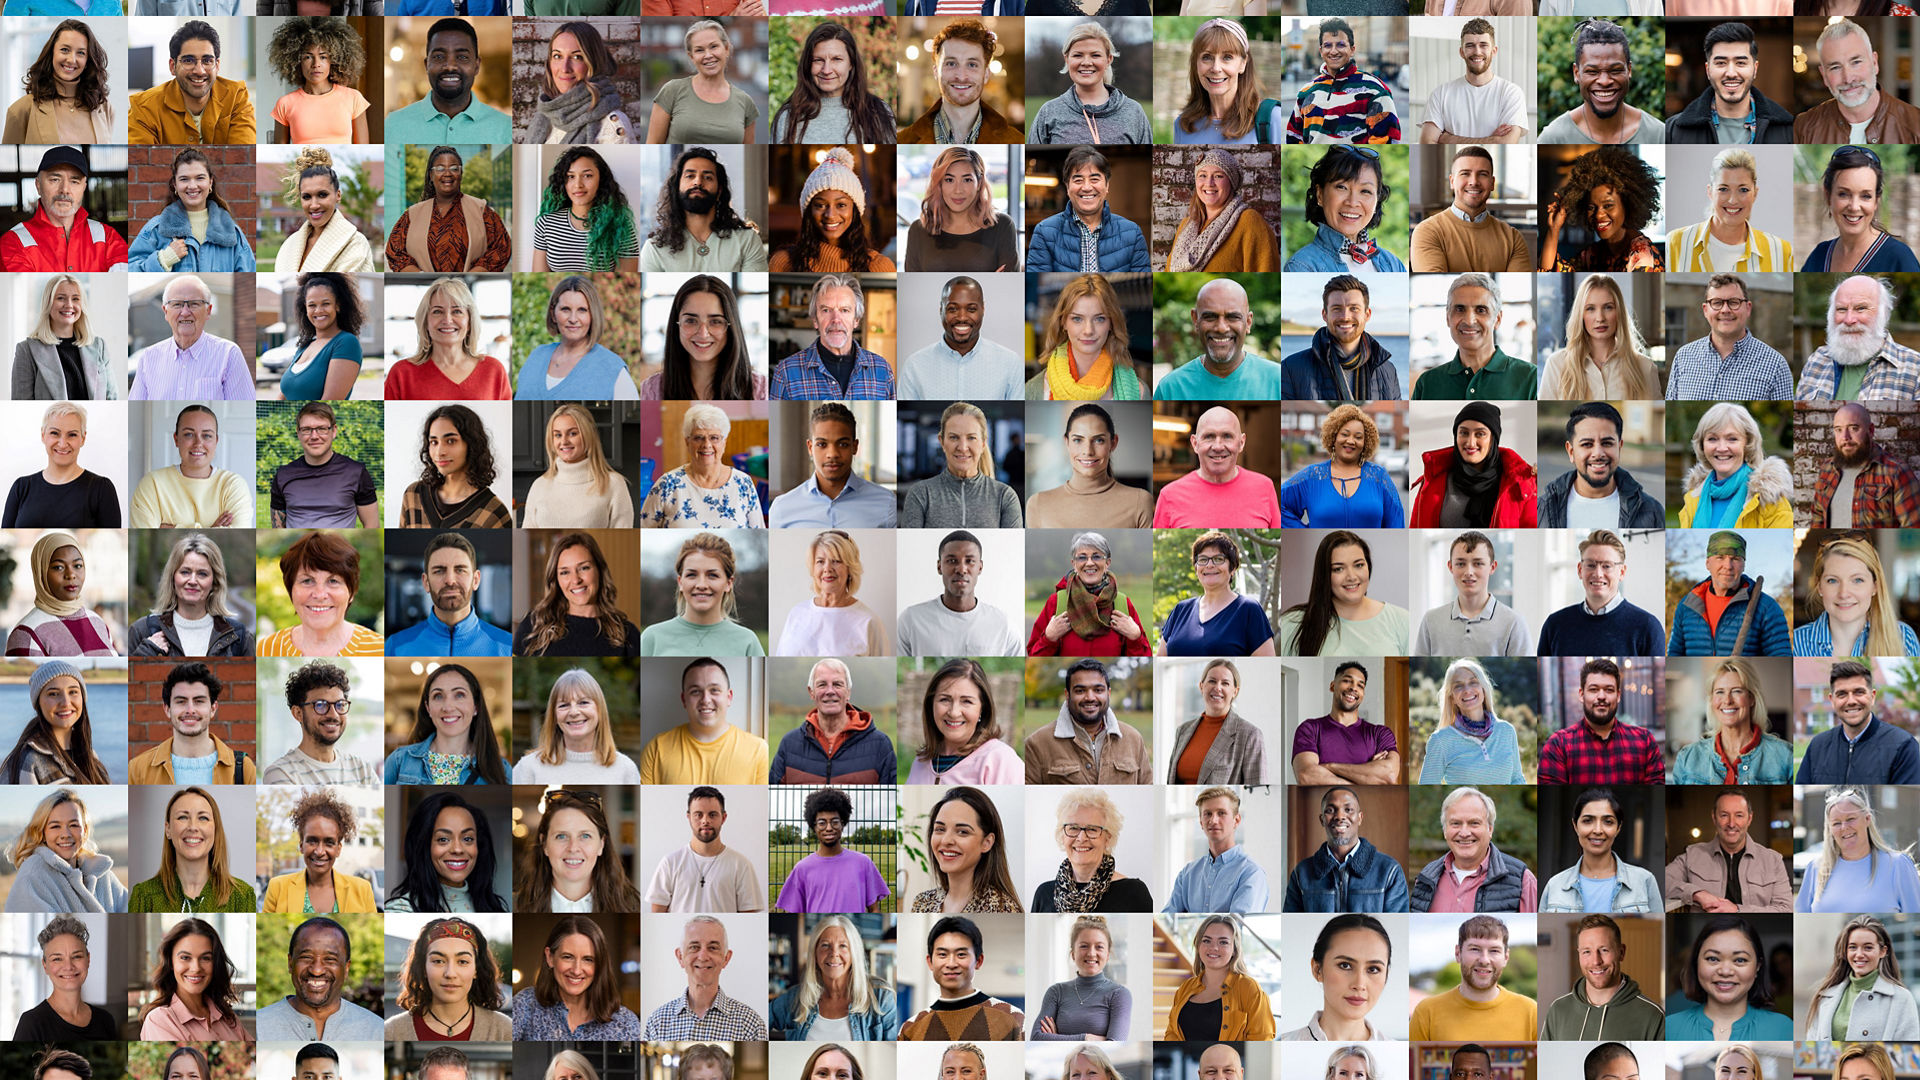 Montage of profile images from people across all types of genders and ethnicities